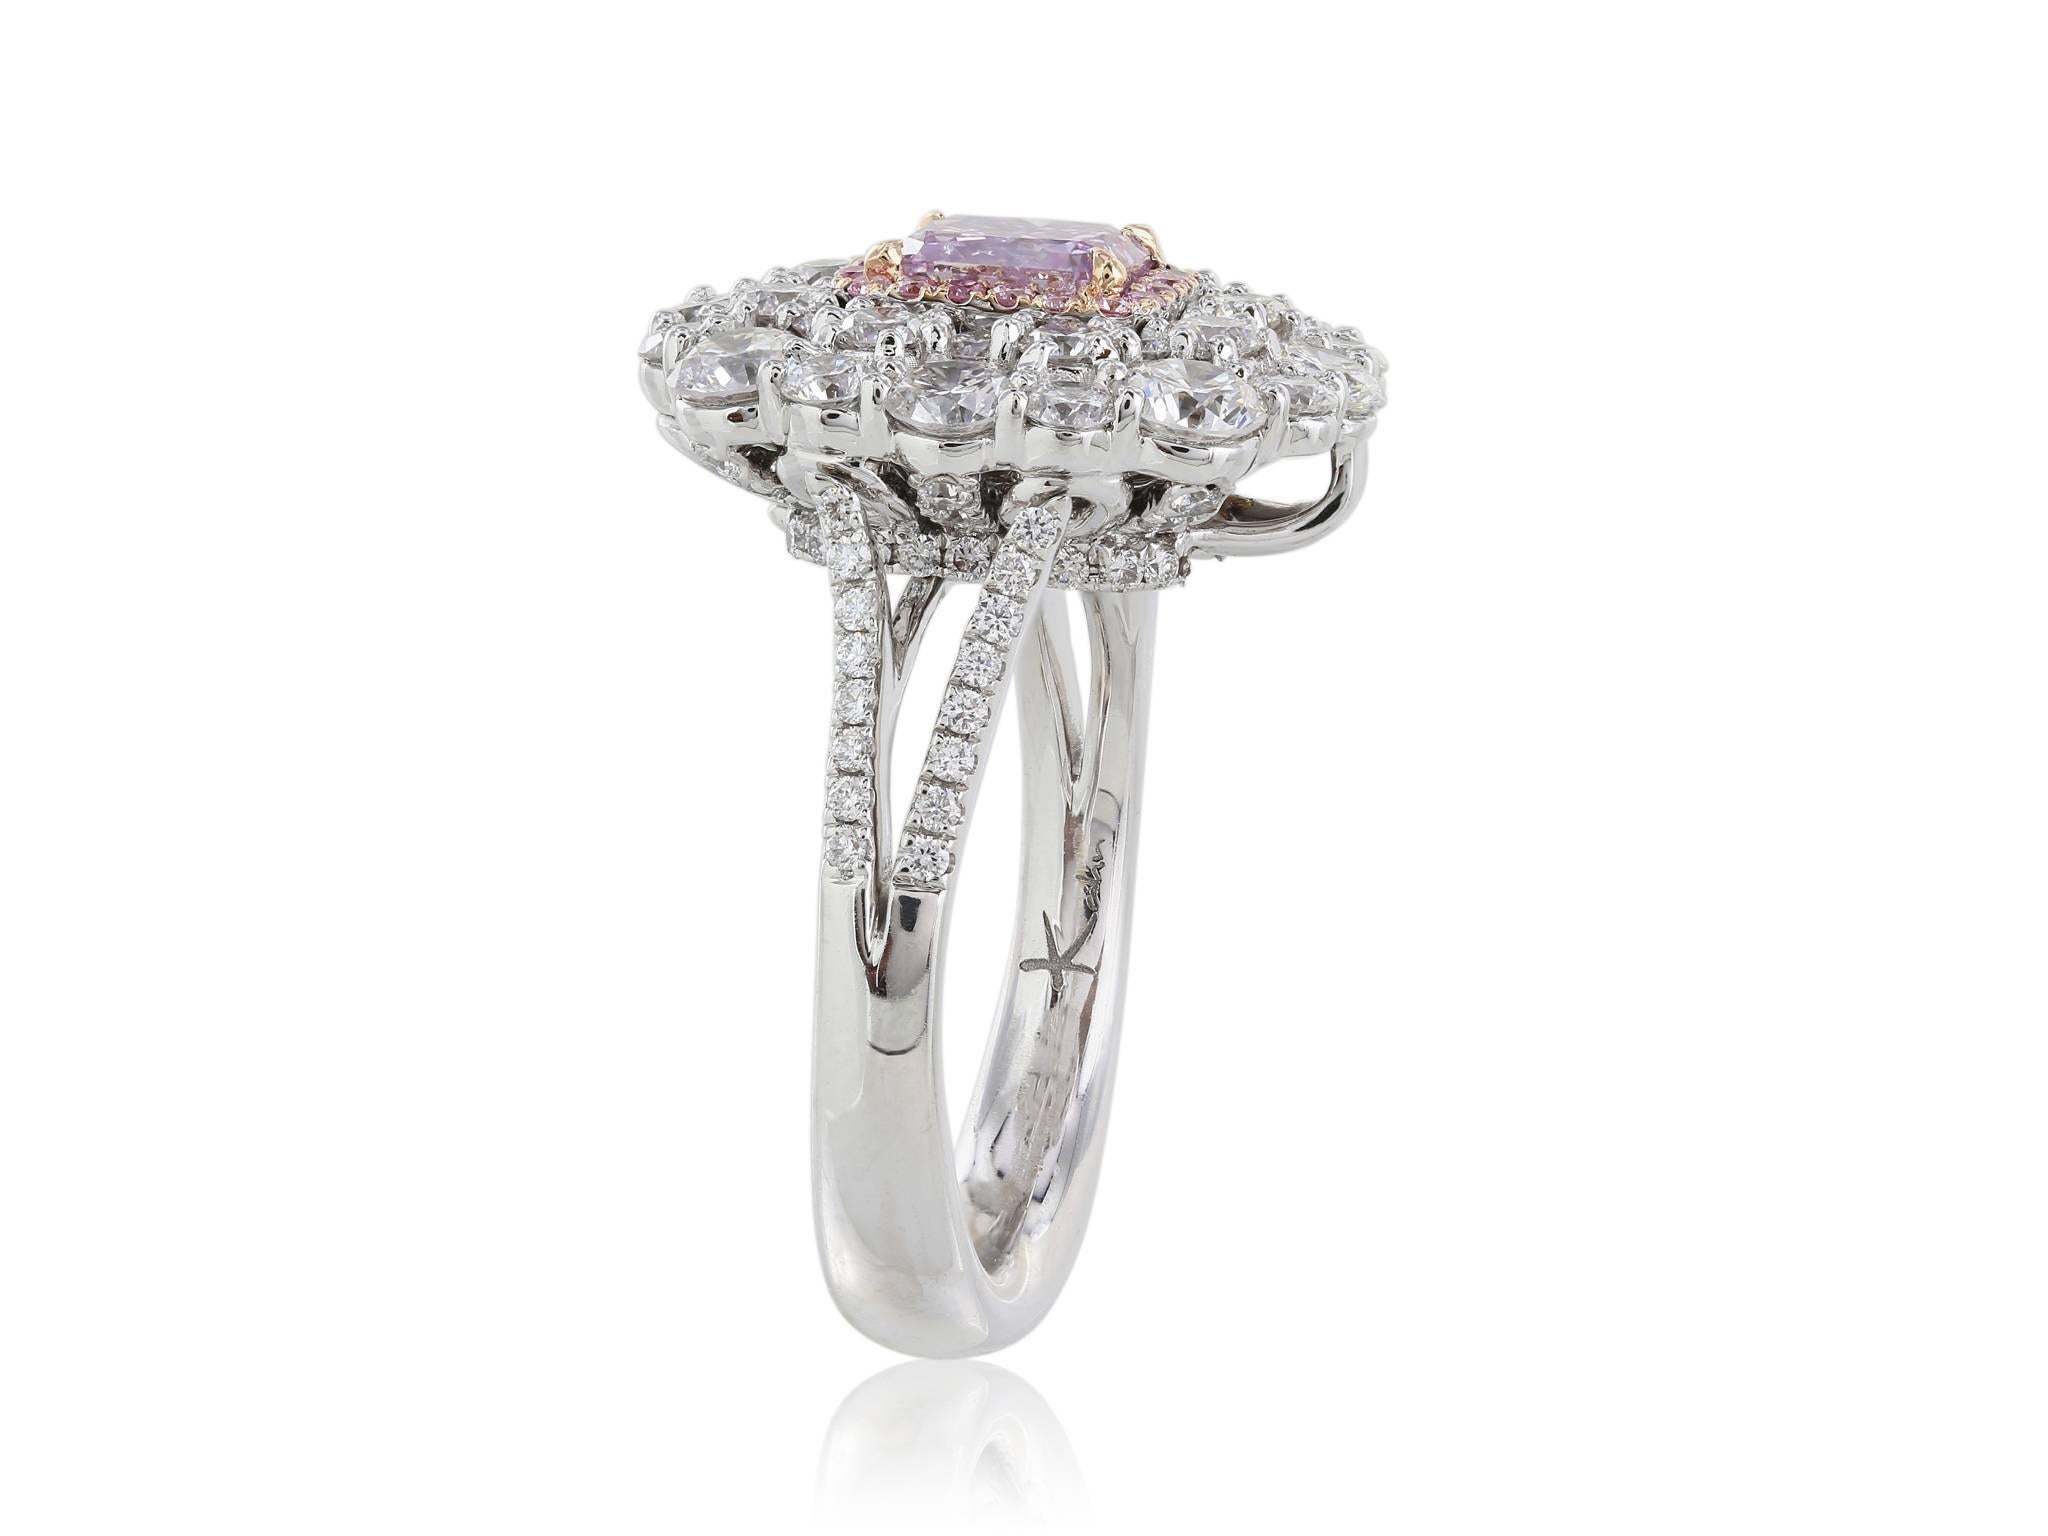 Stunning 18 Karat white gold ring with one radiant cut GIA certified fancy pink-purple center stone with a clarity of I1.  The center stone is surrounded by a halo of round brilliant cut pink diamonds weighing .11 carats and a larger halo of white